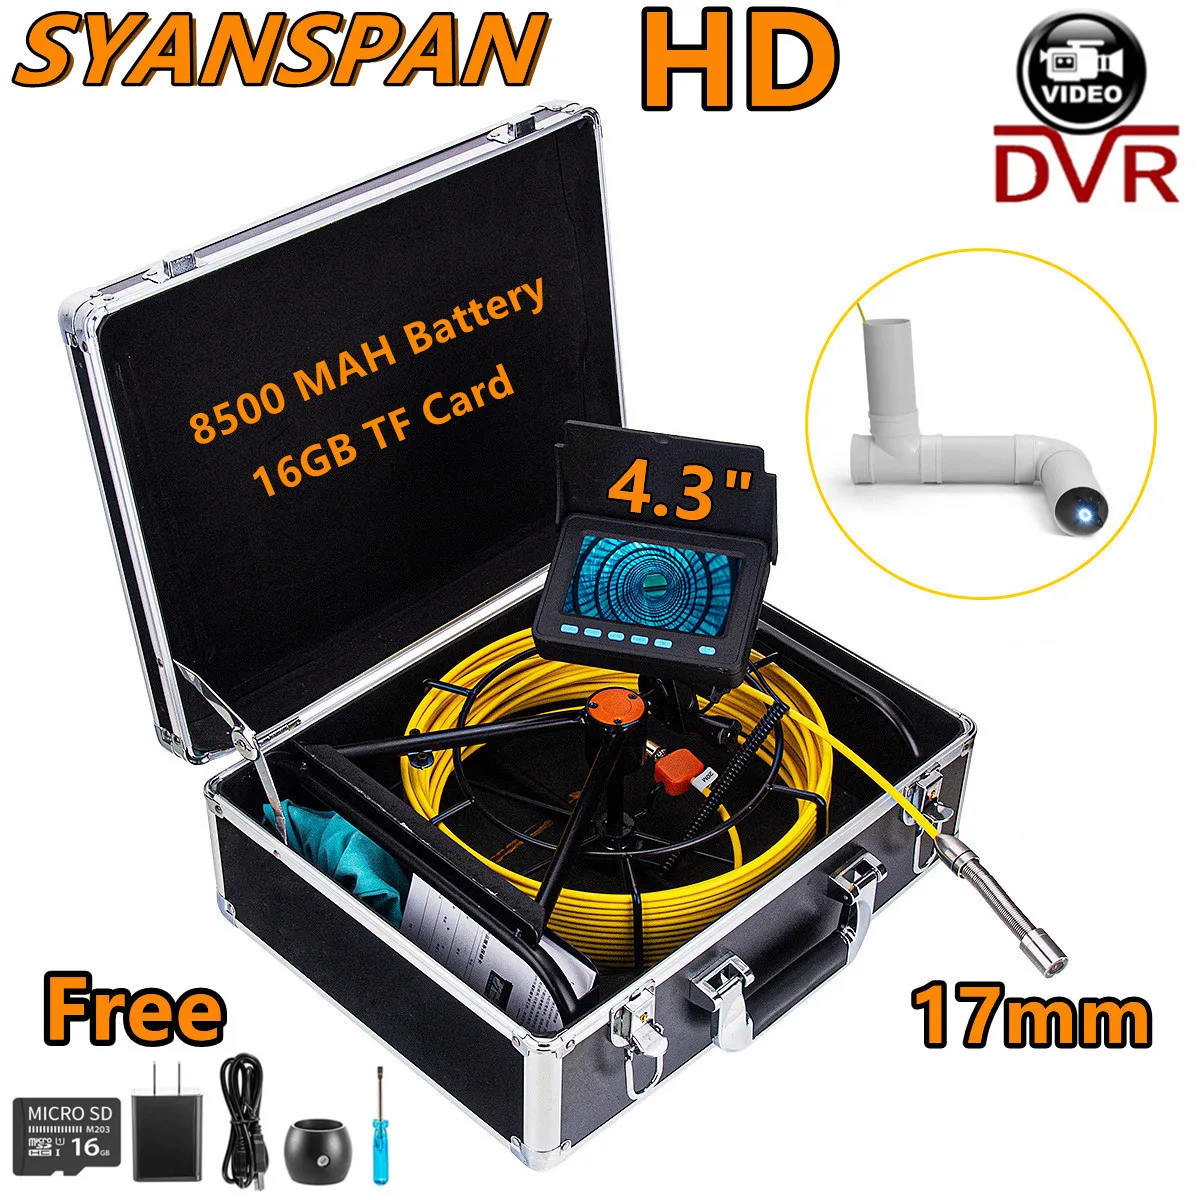 

Pipe Inspection Camera with DVR 16GB FT Card,SYANSPAN Sewer Drain Industrial Endoscope IP68 8500MHA Battery 10/20/30/50M